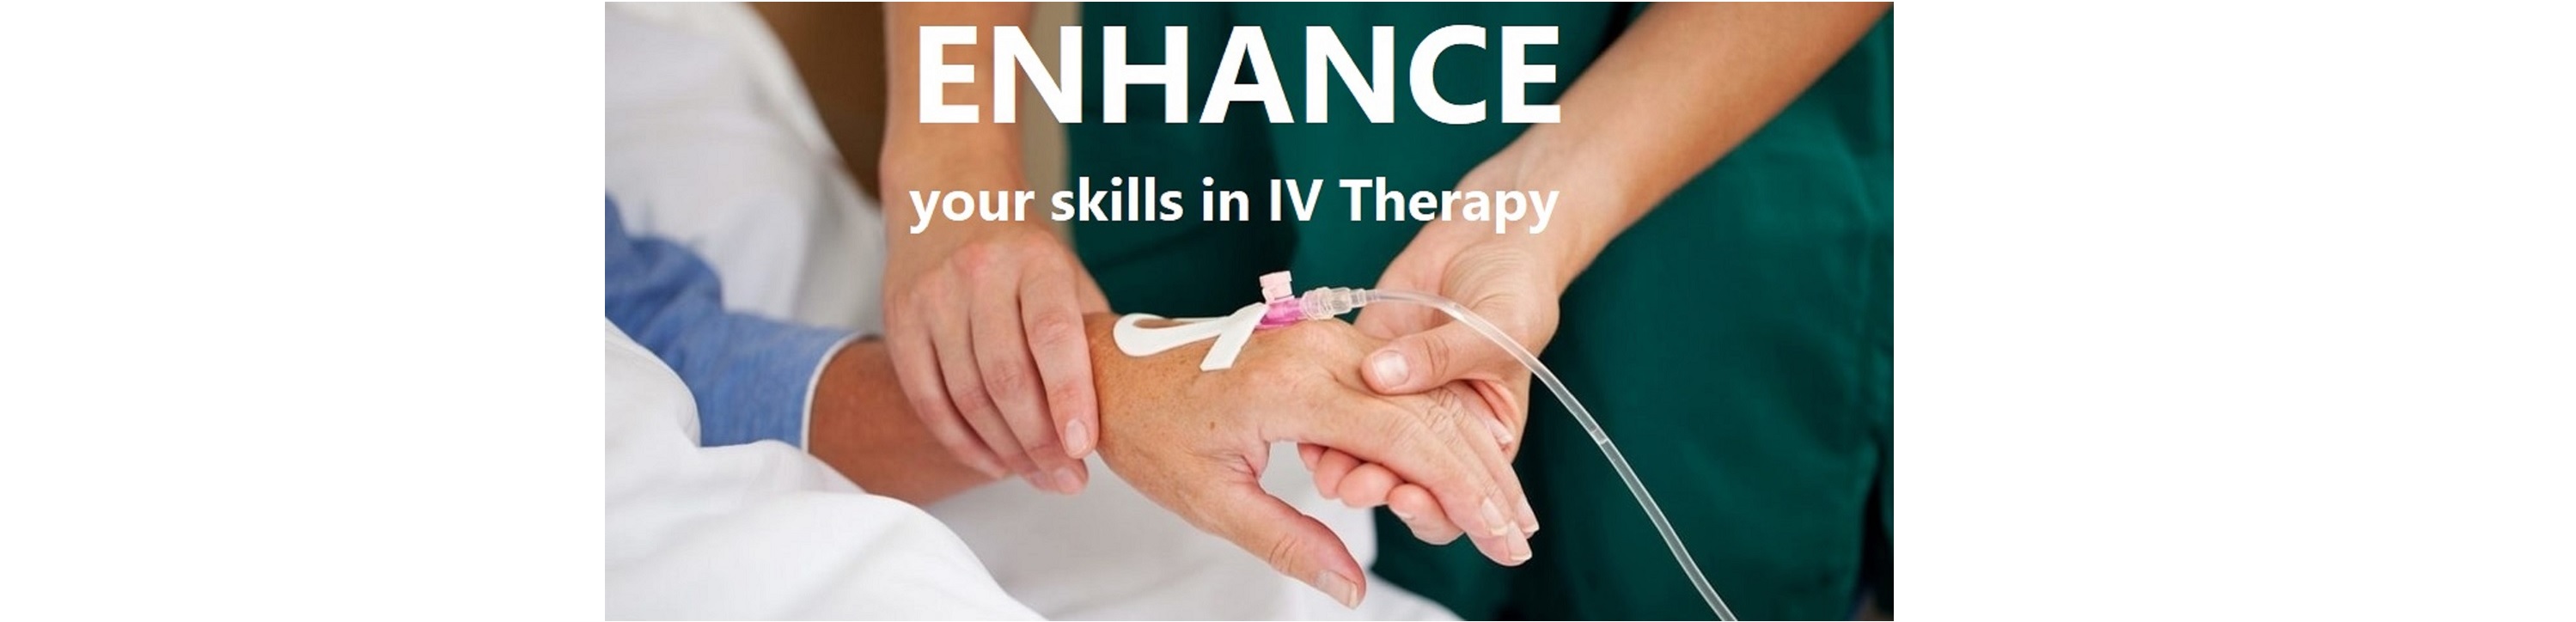 IV Therapy Course - CAMDEN -Saturday, January 25, 2020 Banner